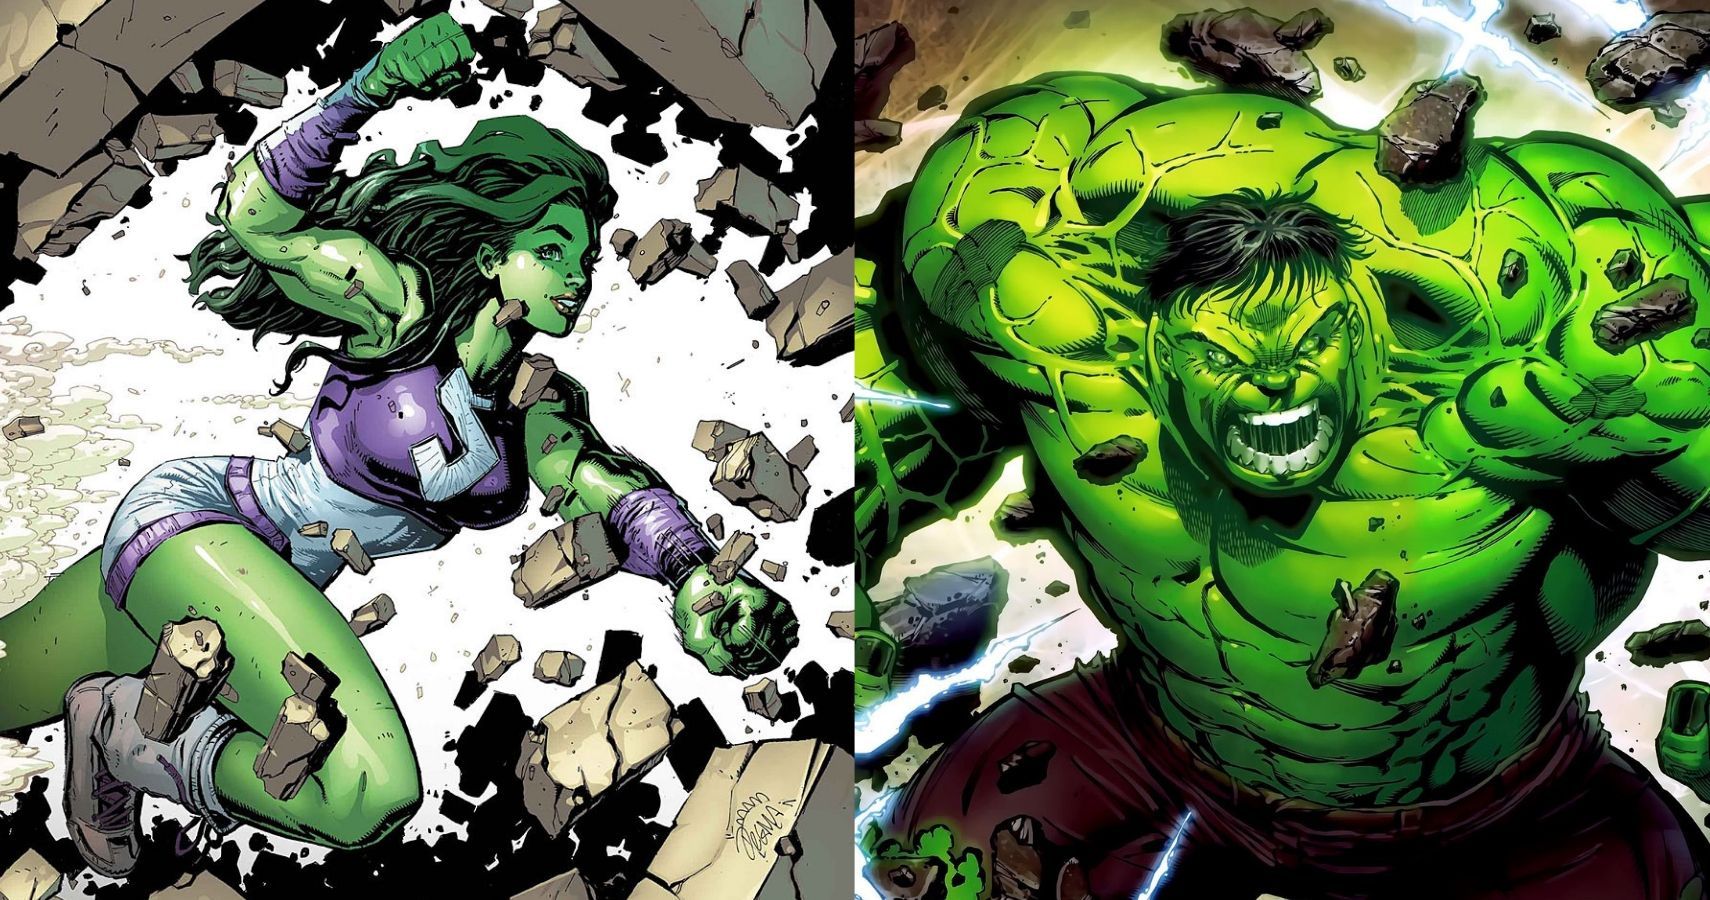 How Could You Have She-Hulk Without The Incredible Hulk? Ruffalo In Talks To Make That Happen